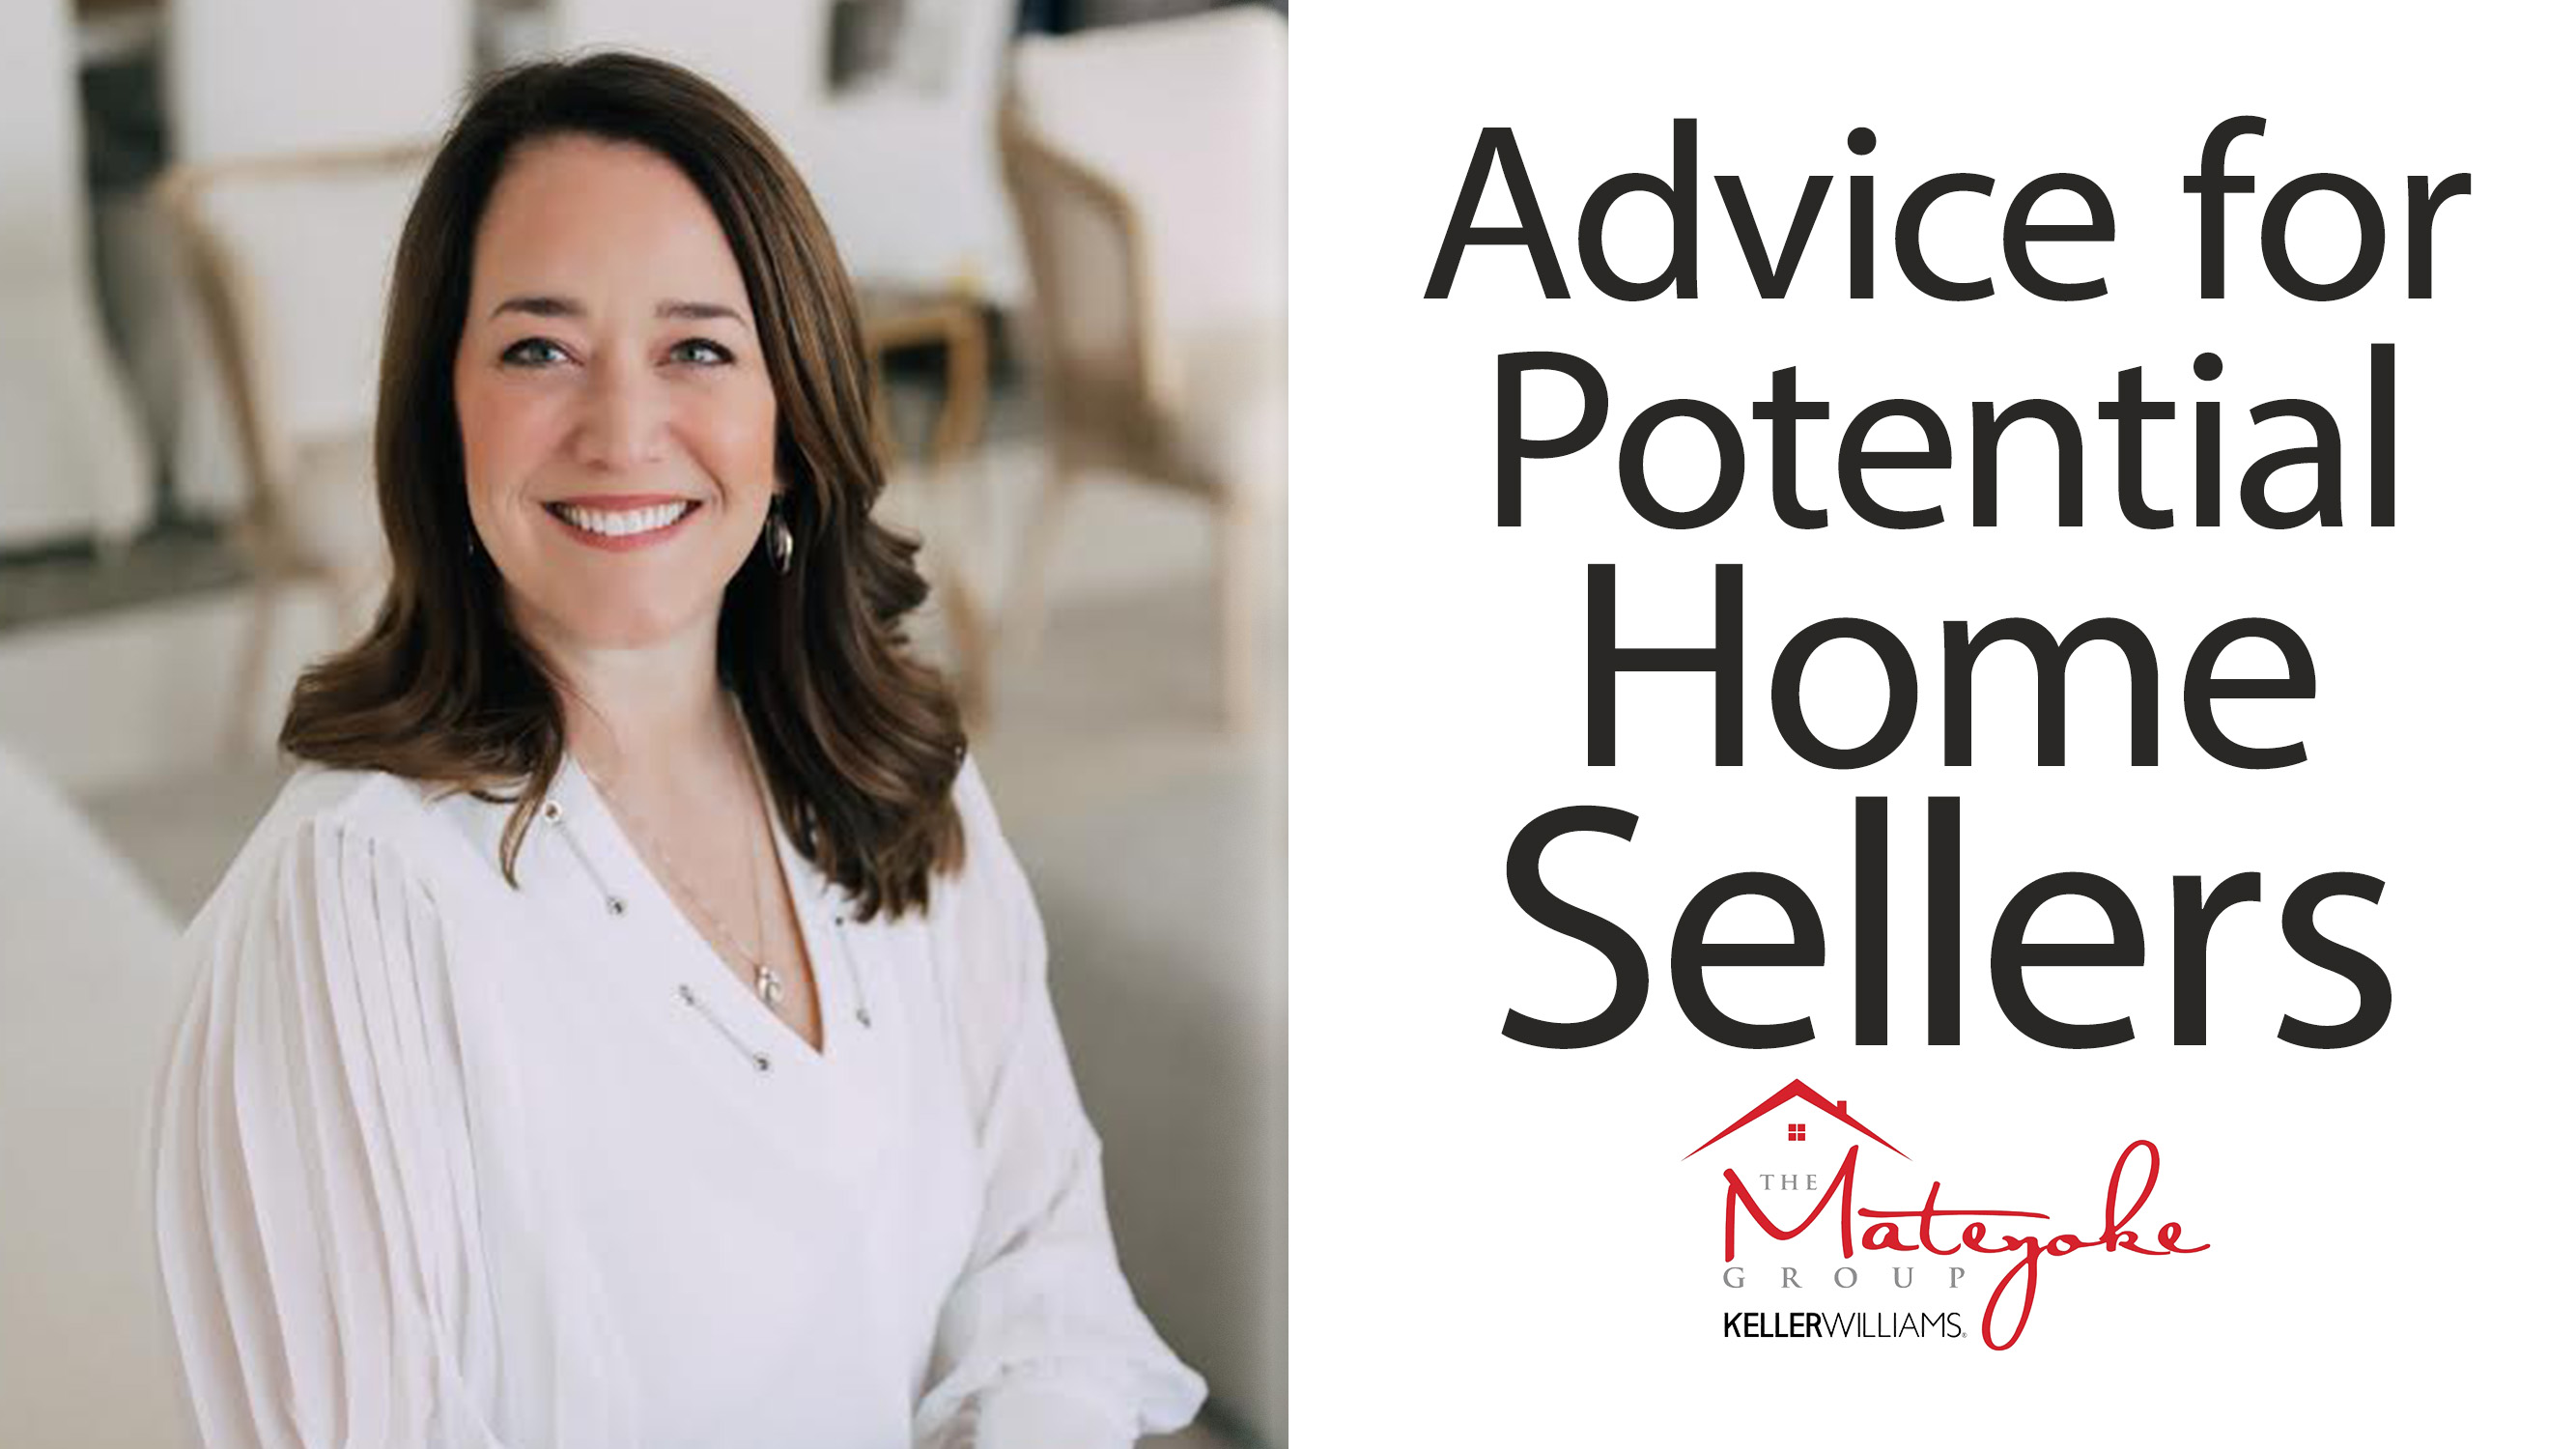 Have You Thought About Selling Your Home?